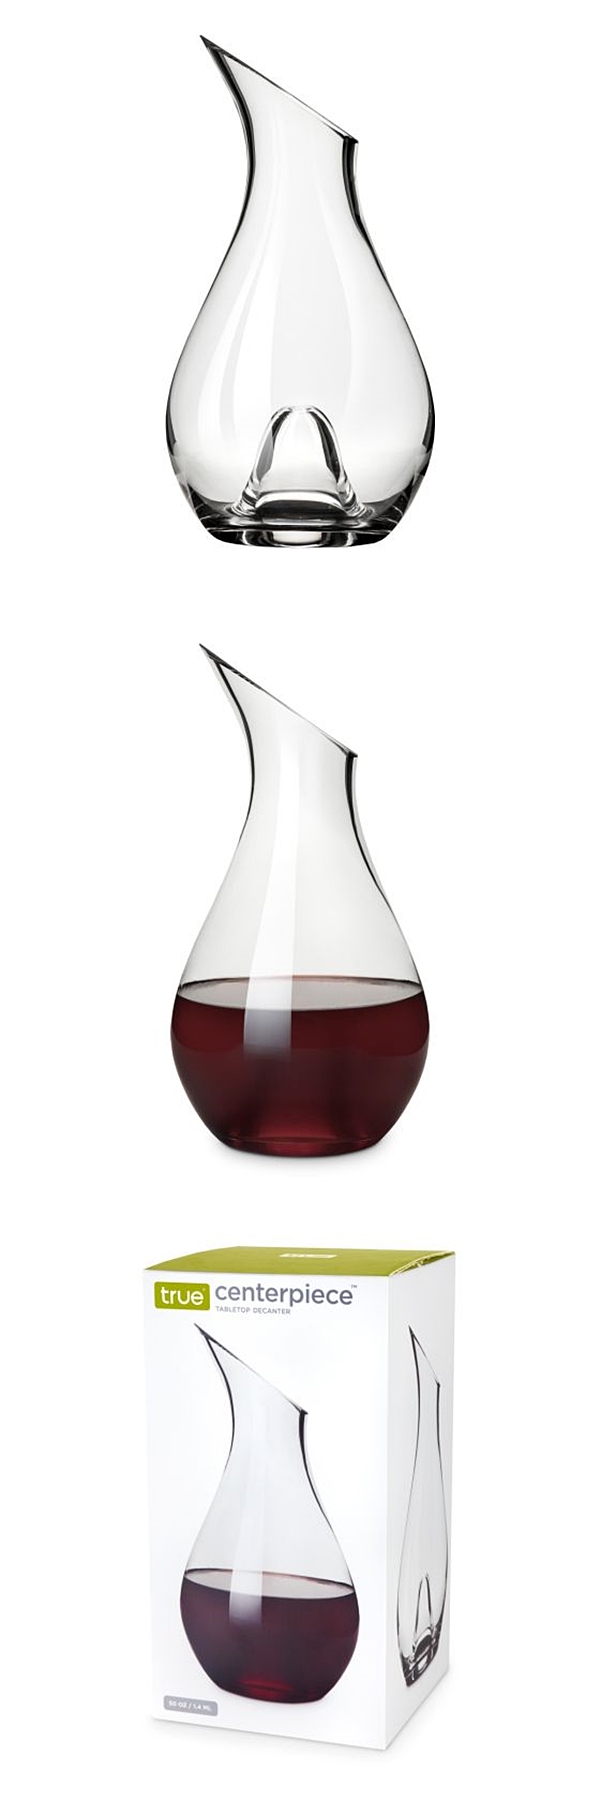 Centerpiece: 50oz Tabletop Glass Decanter with Hourgalss Shape by True